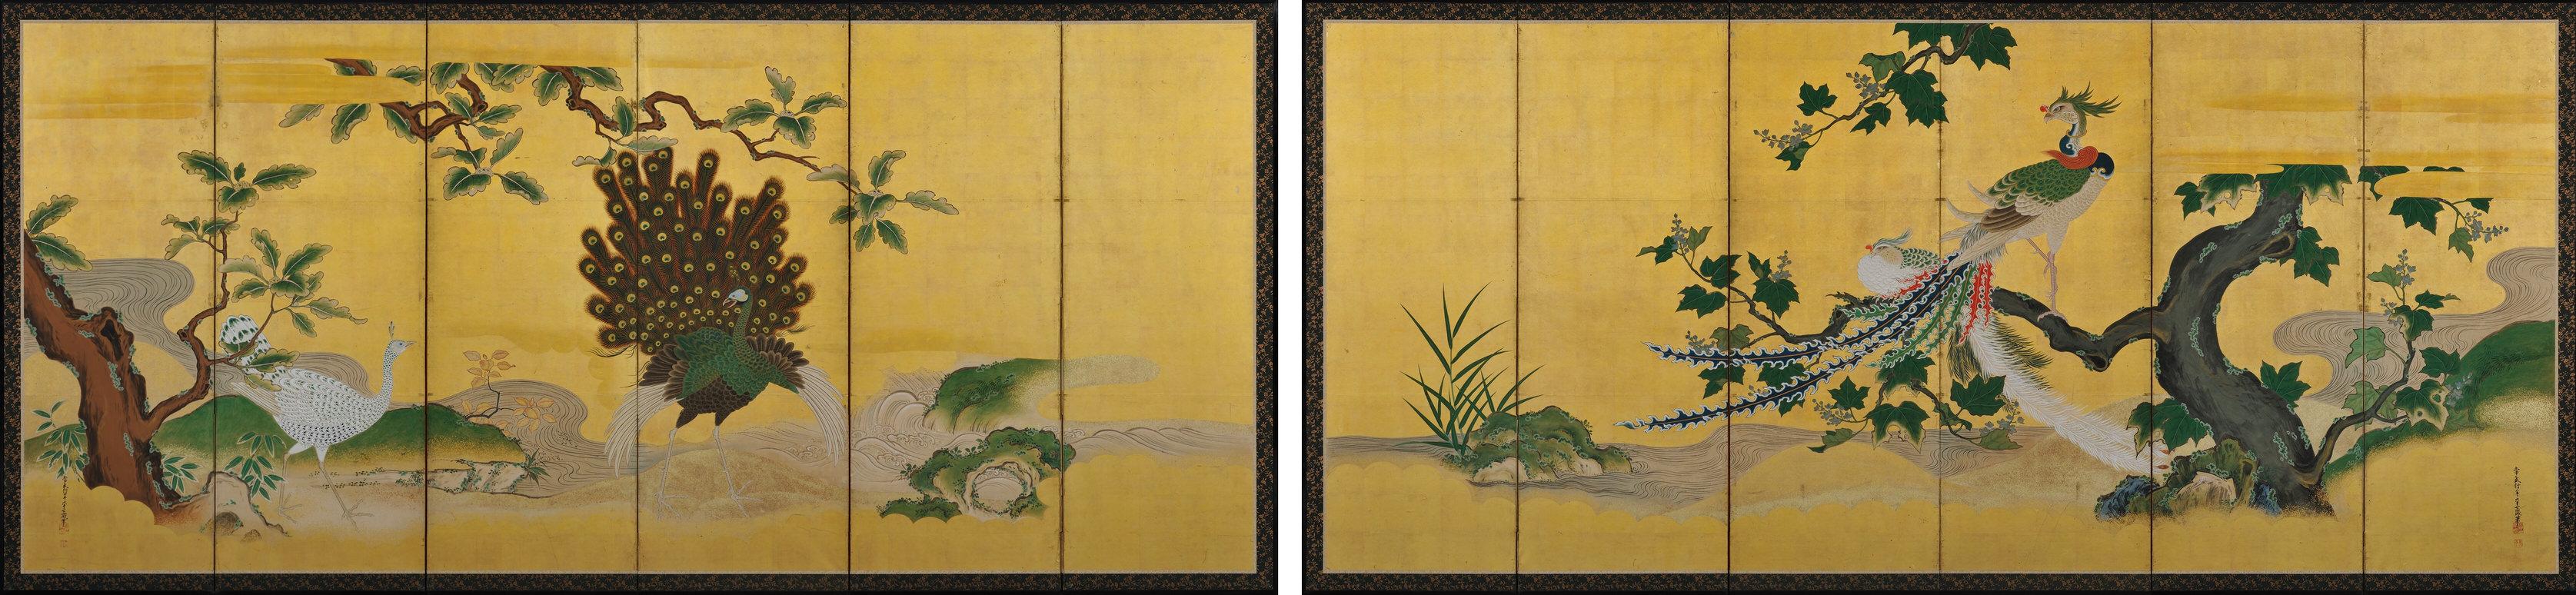 Phoenix and Peacocks.

A pair of six-panel Japanese folding screens by Tsunetake Yotei (n.d.)

First half of the 18th century.

The signature reads 67 year old Tsunetake.

The seals read:
-Tsunetake no